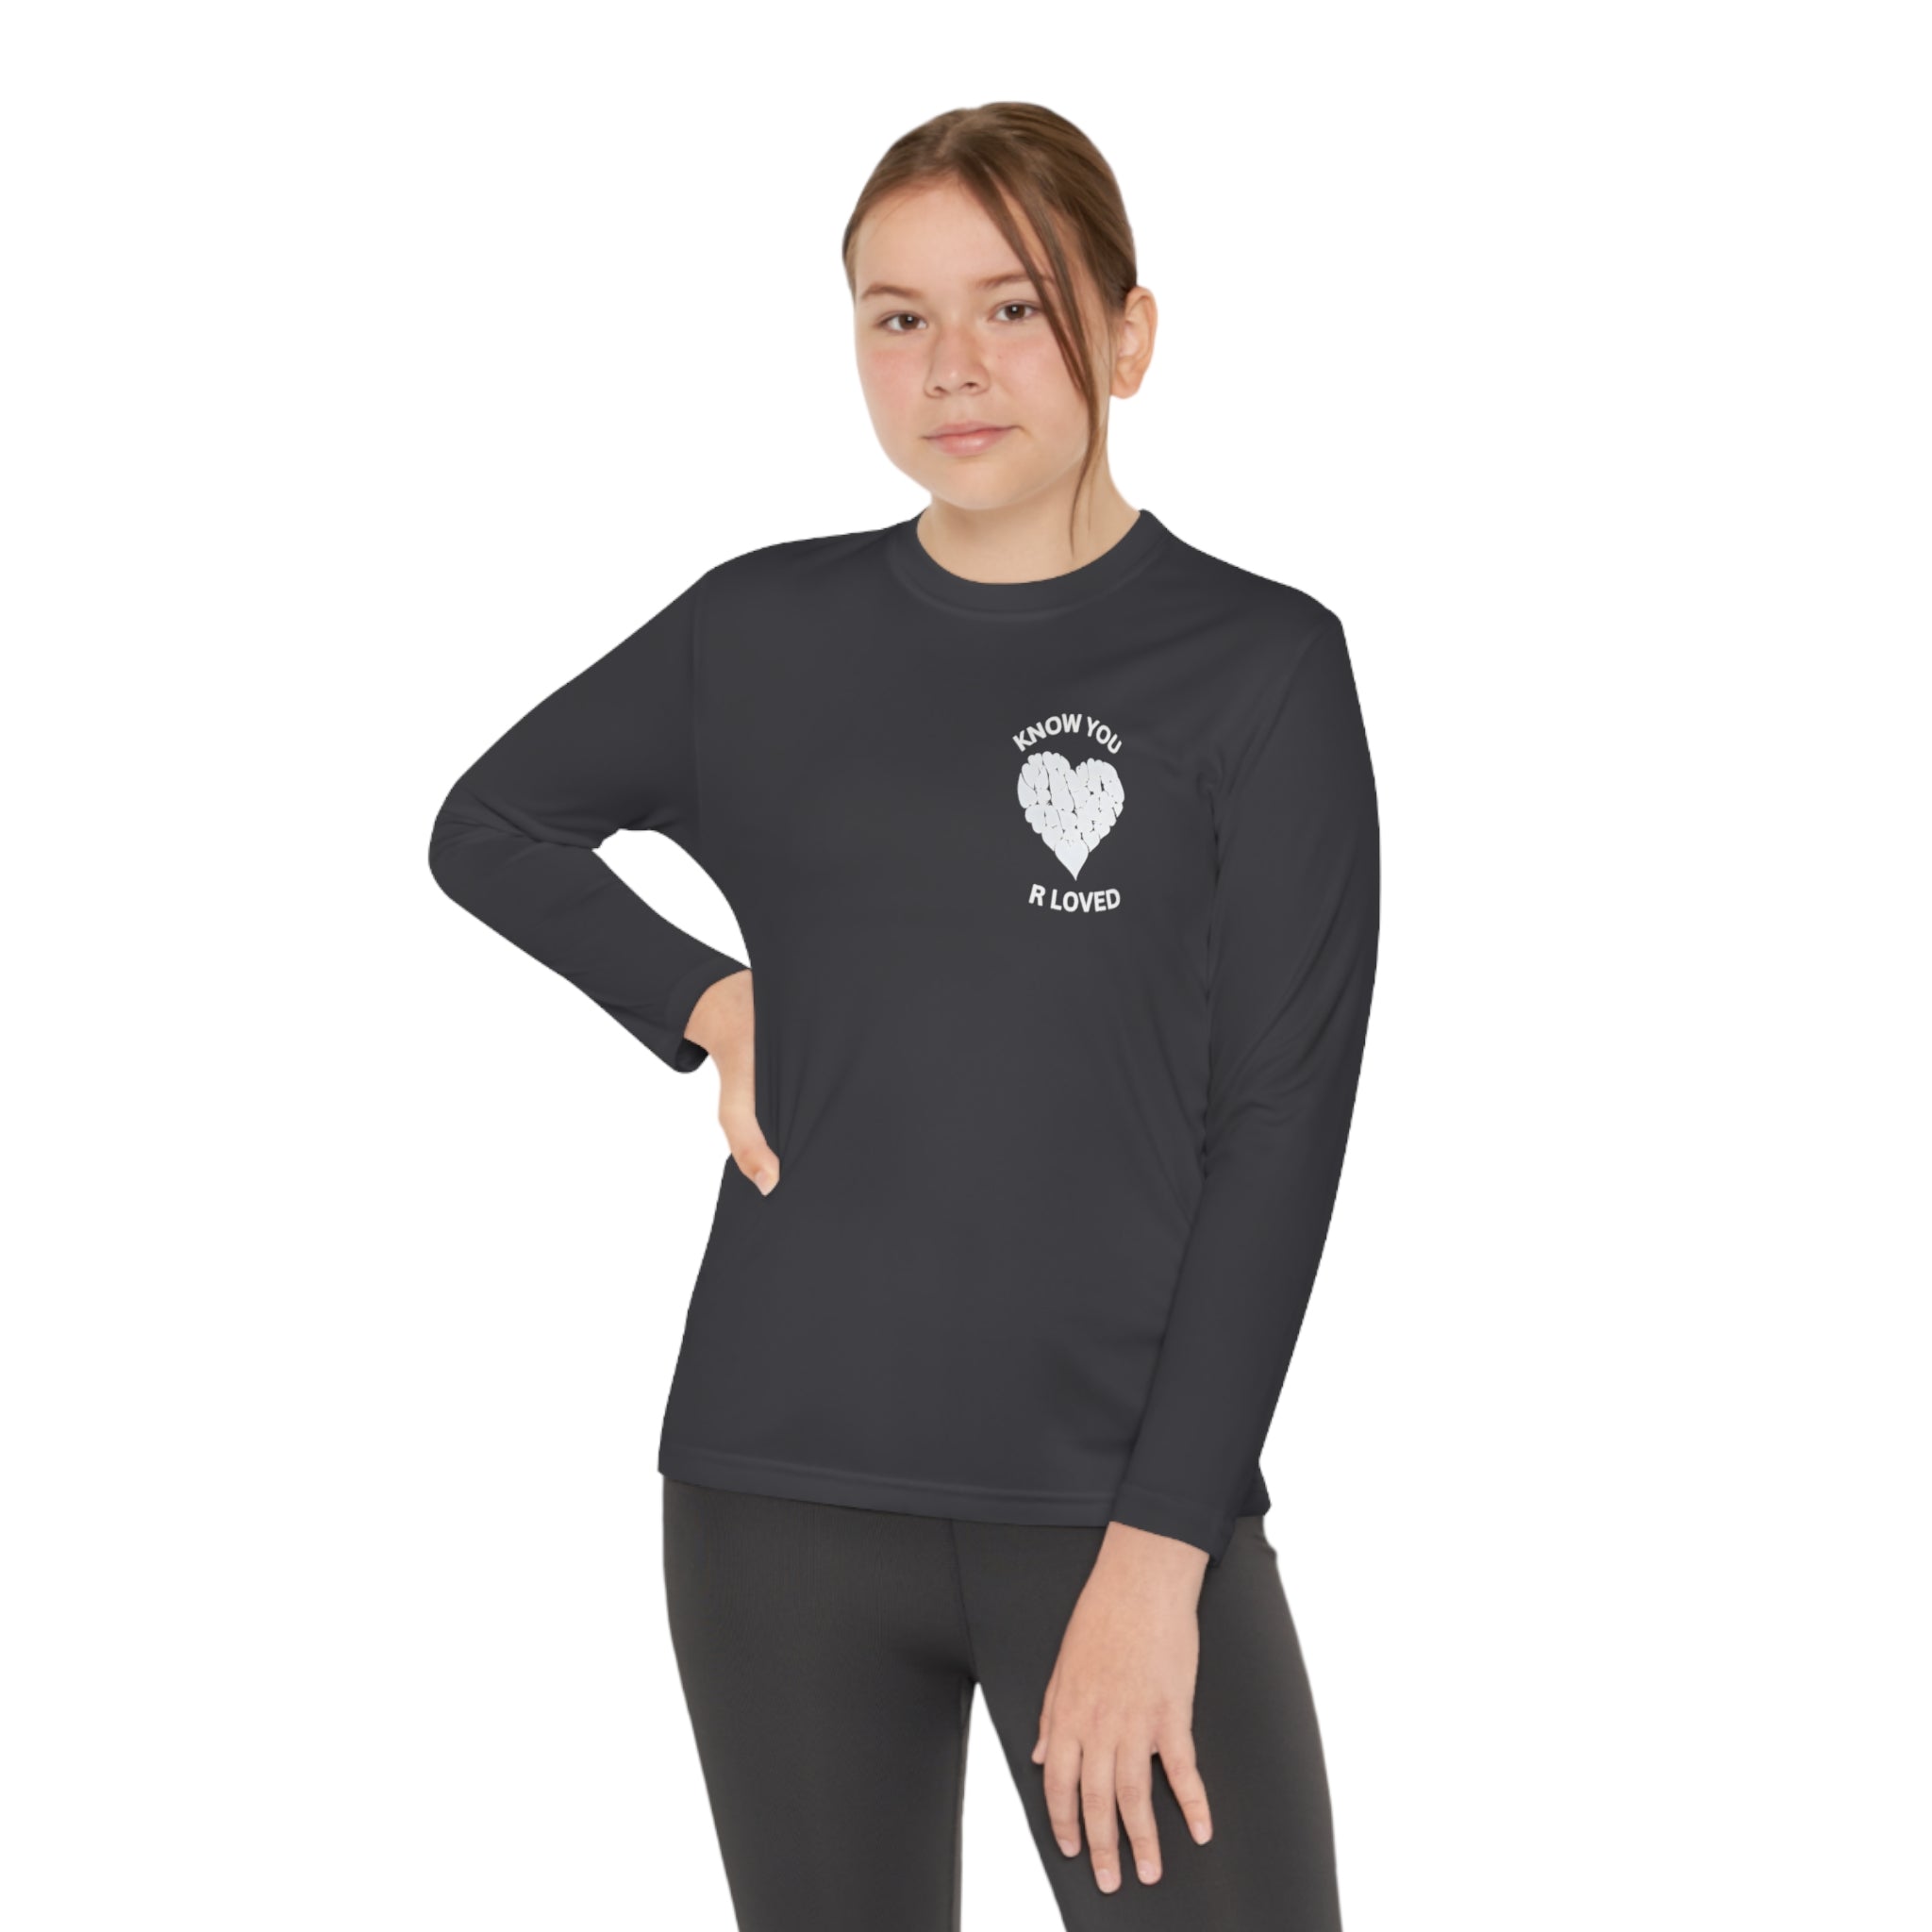 Know You Are Loved Youth Long Sleeve Competitor T-Shirt